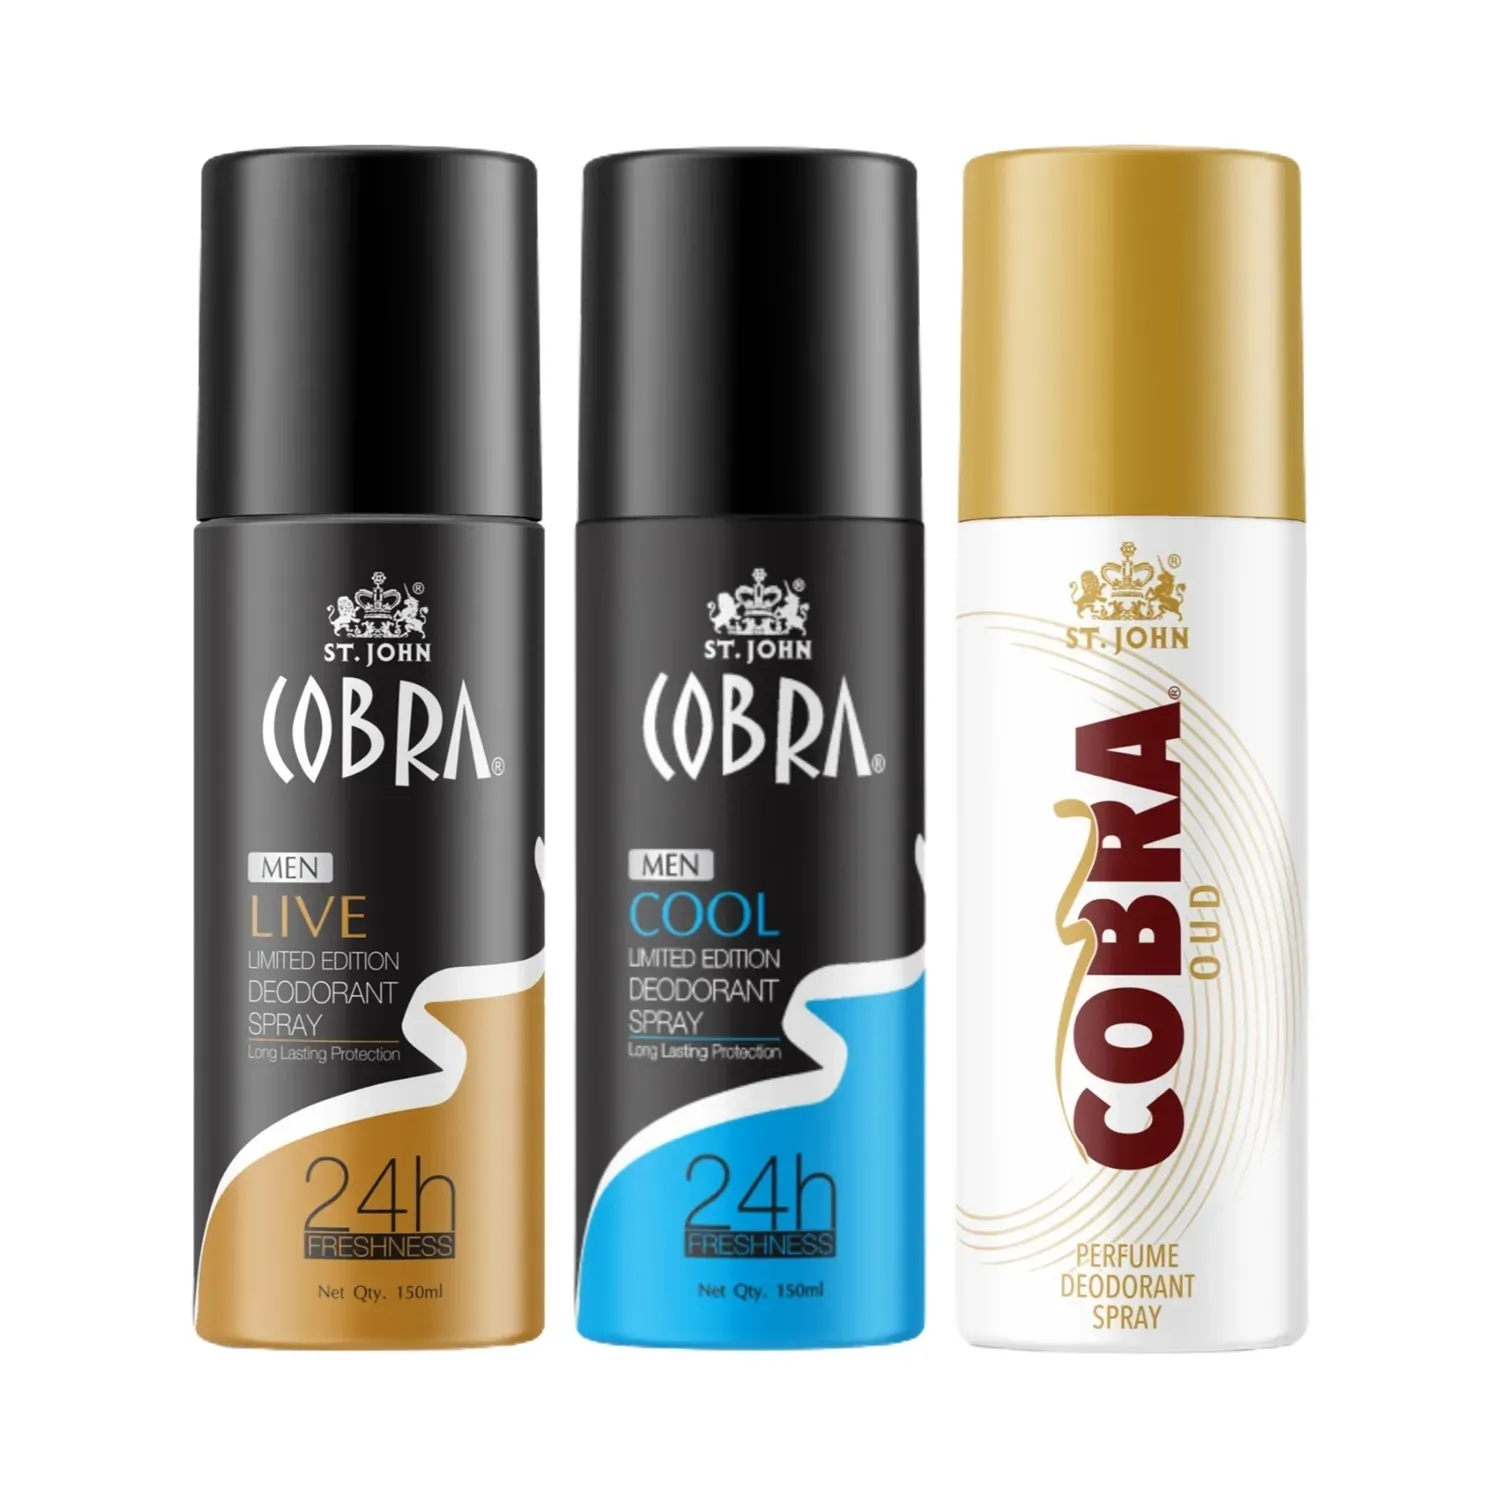 ST.JOHN Cobra Live, Cool And Oud Limited Edition Deodorant Spray (3 Pcs)